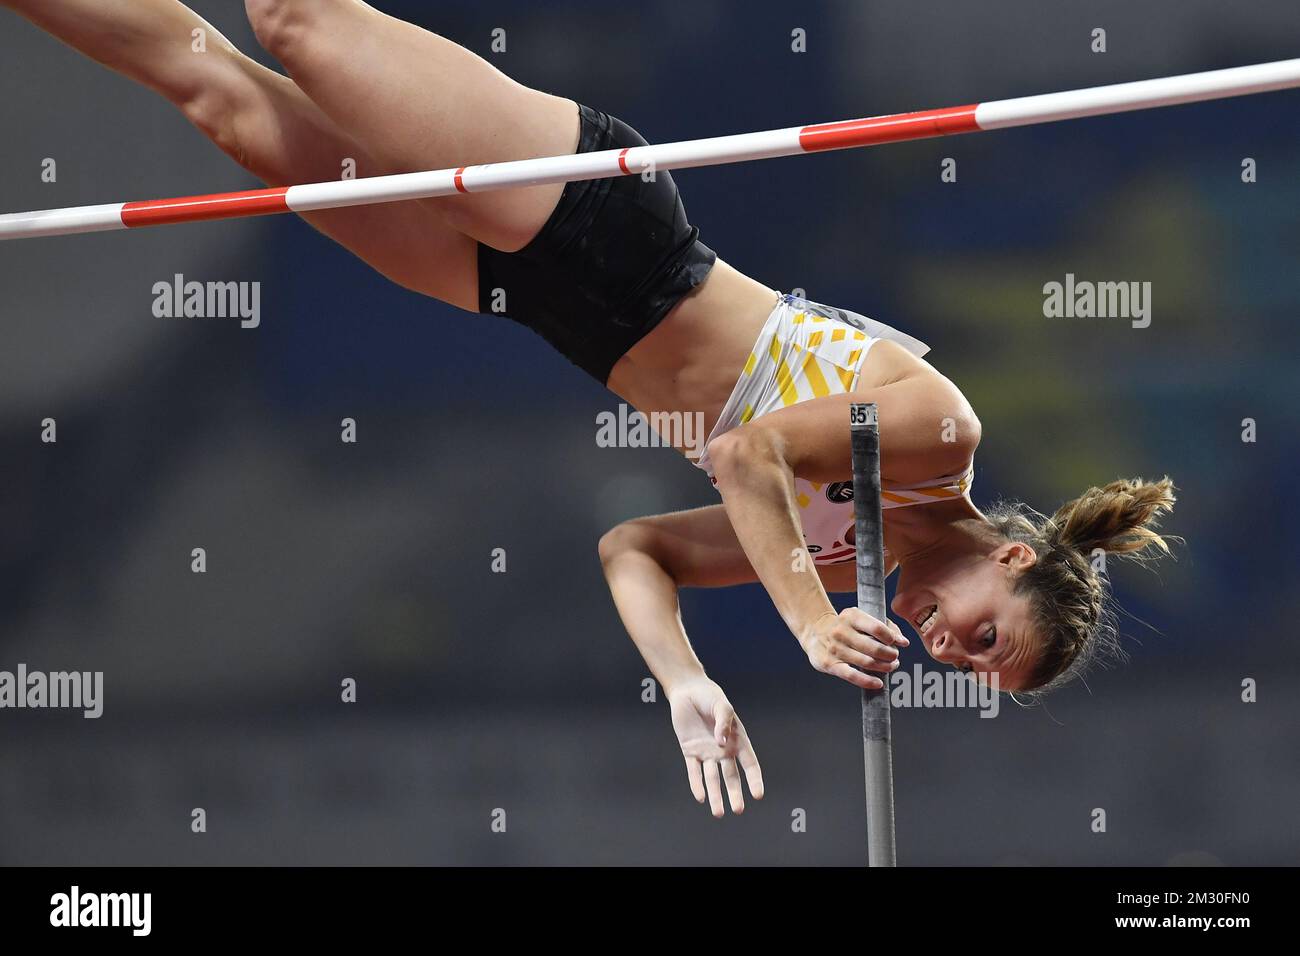 Belgian Fanny Smets Pictured In Action During Qualifications For The